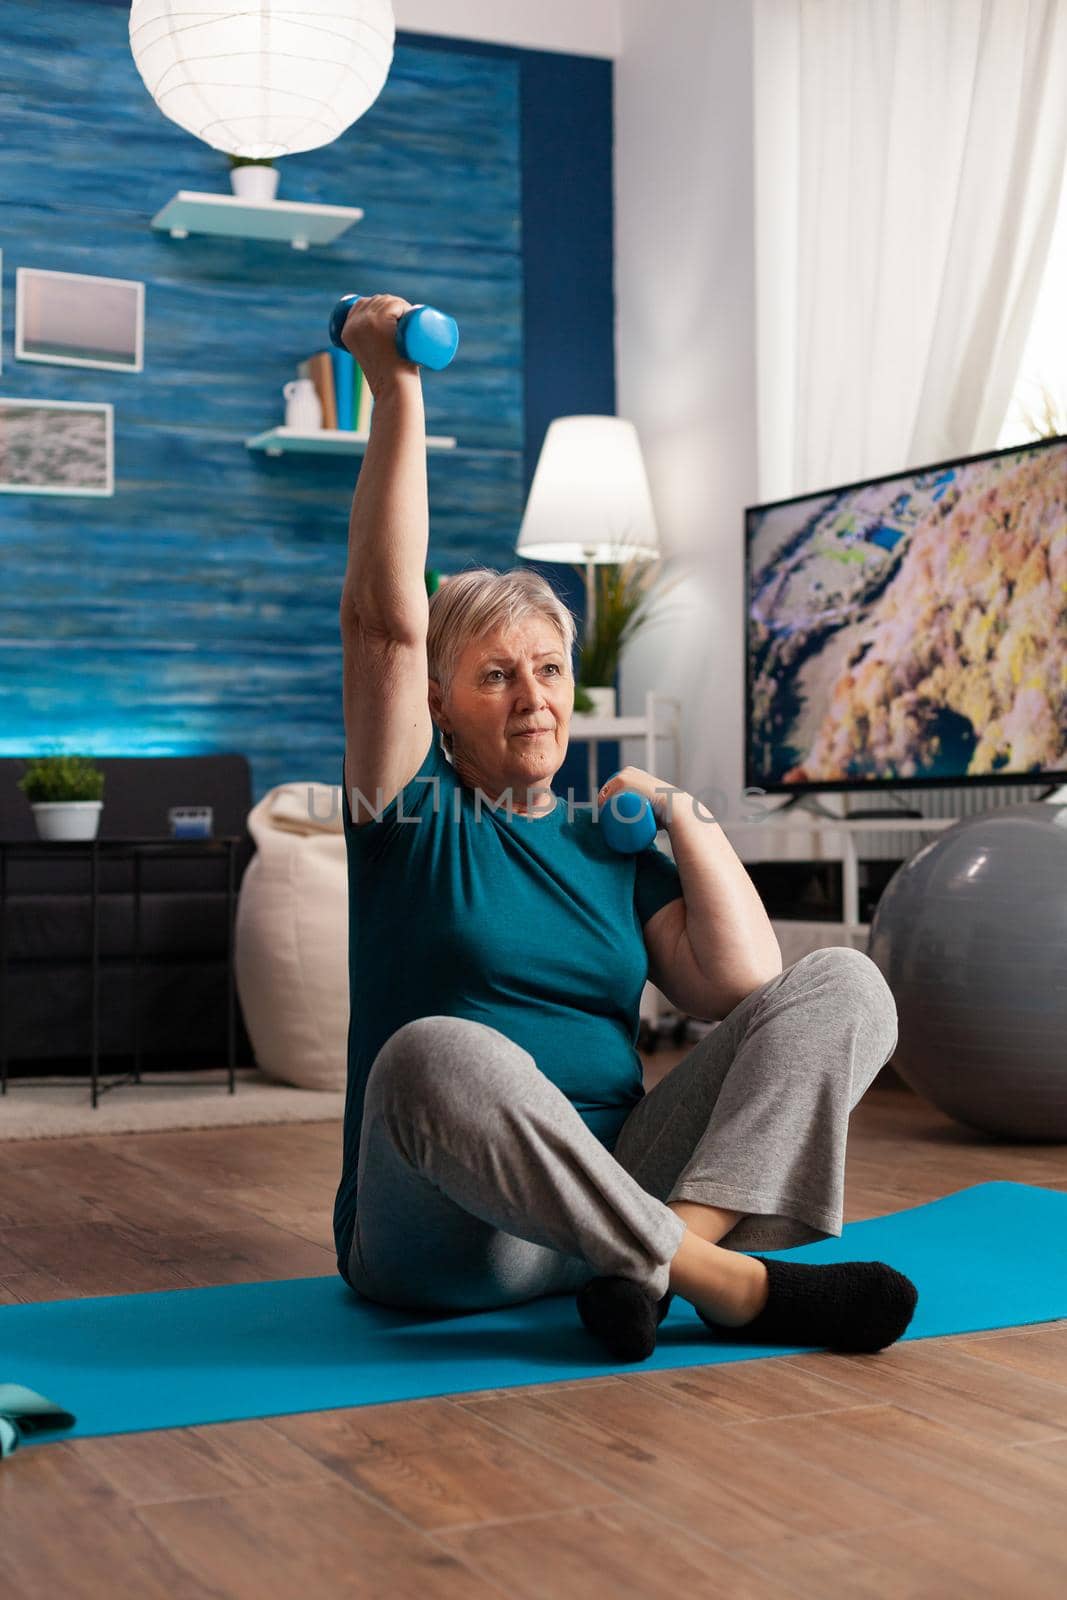 Retired senior woman sitting on yoga mat in lotus position raising hand during wellness routine warming up training body muscles using dumbbells. Pensioner in sportswear practicing abs exercise